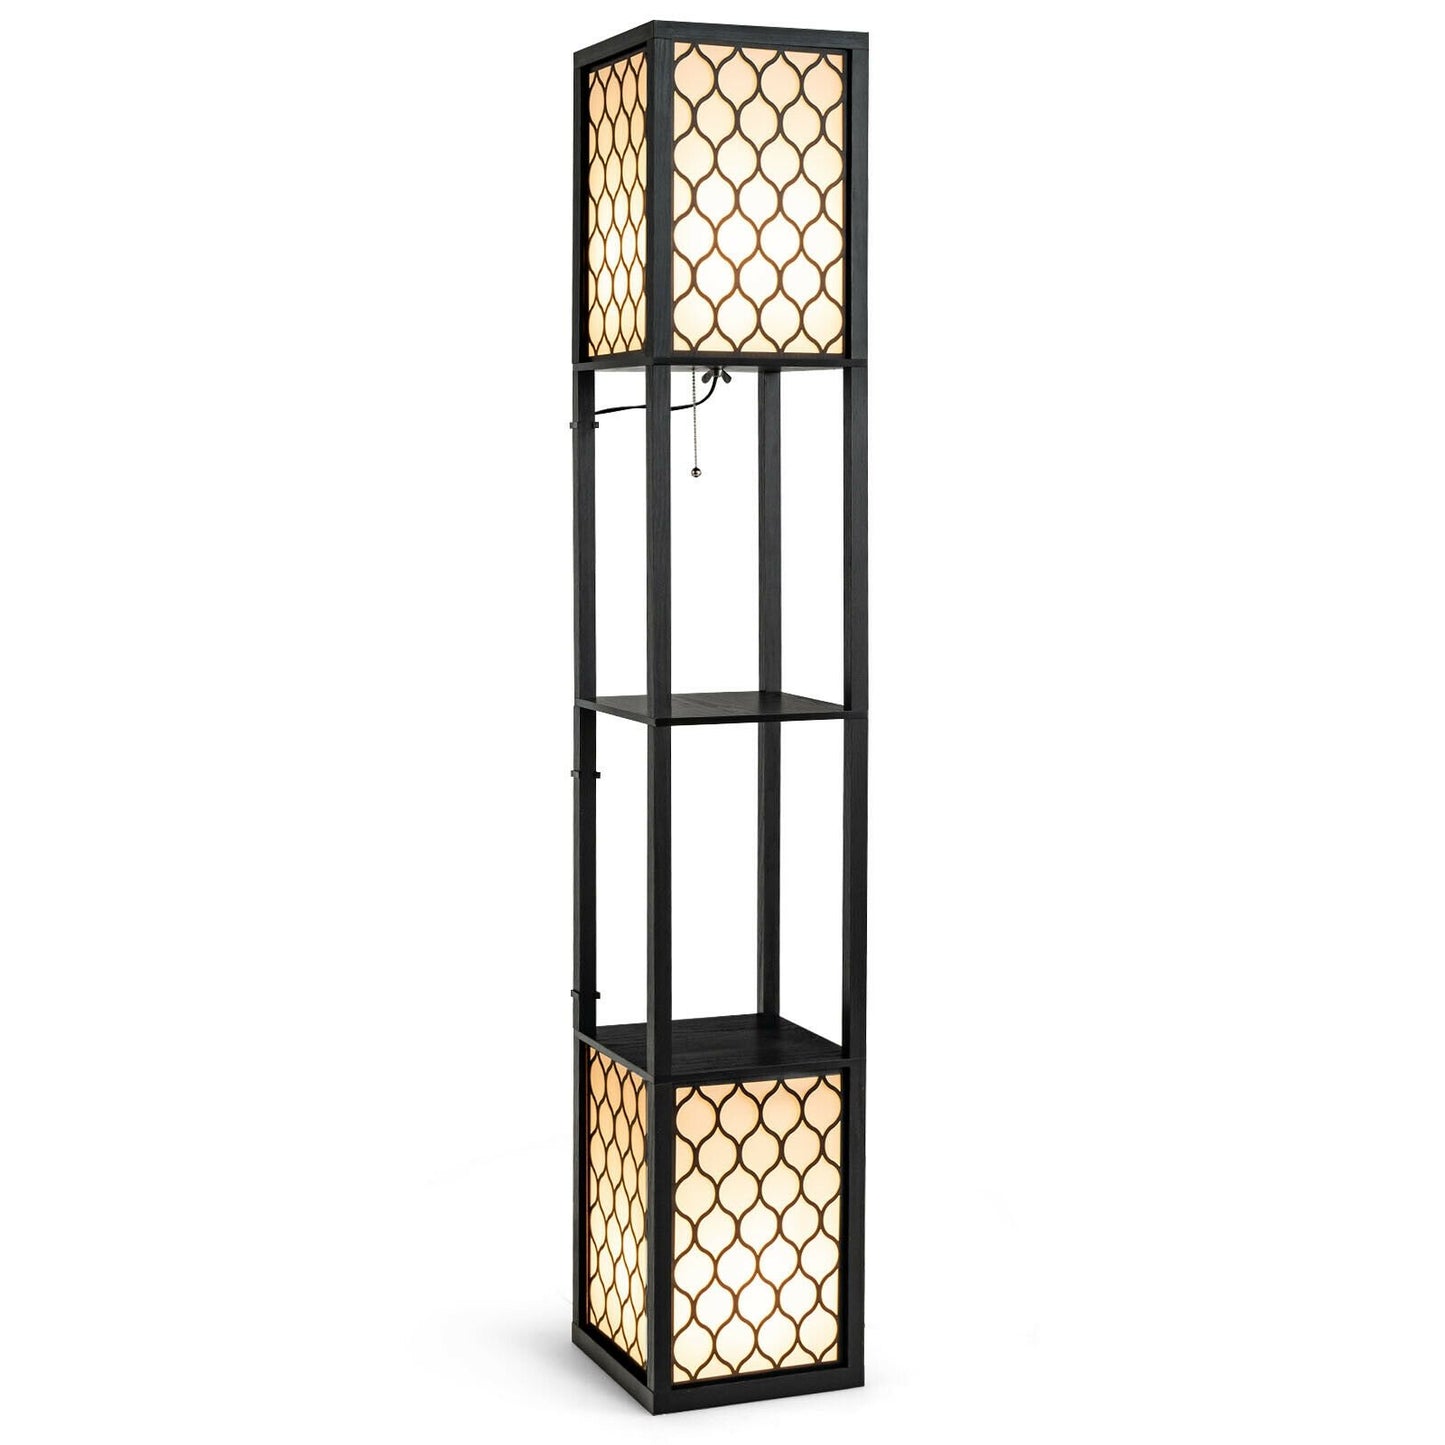 Modern Shelf Freestanding Floor Lamp with Double Lamp Pull Chain and Foot Switch, Black